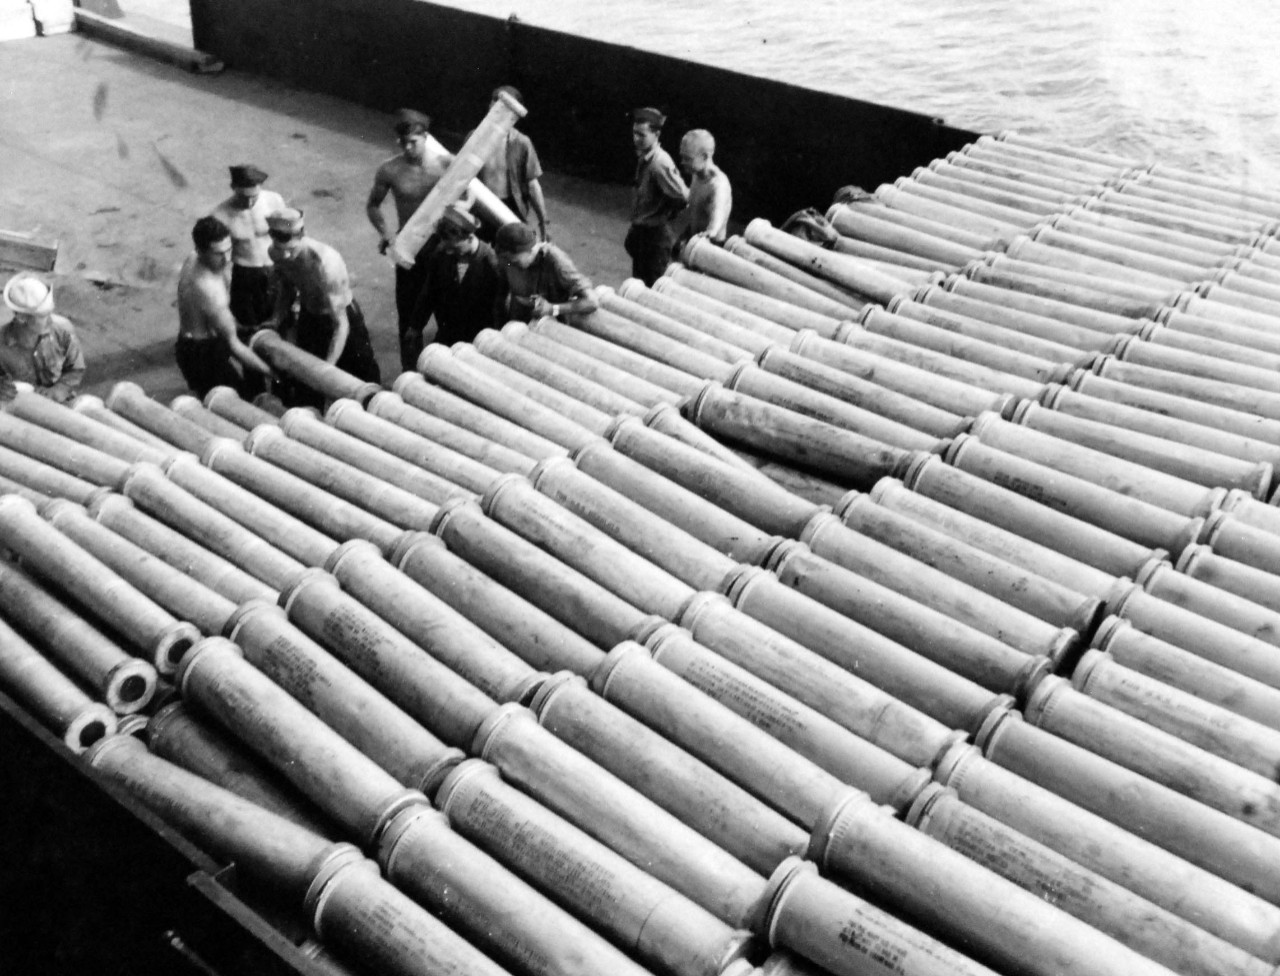 80-G-52883:  Battle of Kula Gulf, July 5-6, 1943.   USS Honolulu (CL-48), empty shell cases crowd the deck as the crew stacks cases.    Official U.S. Navy Photograph, now in the collections of the National Archives.  (2018/04/04).  